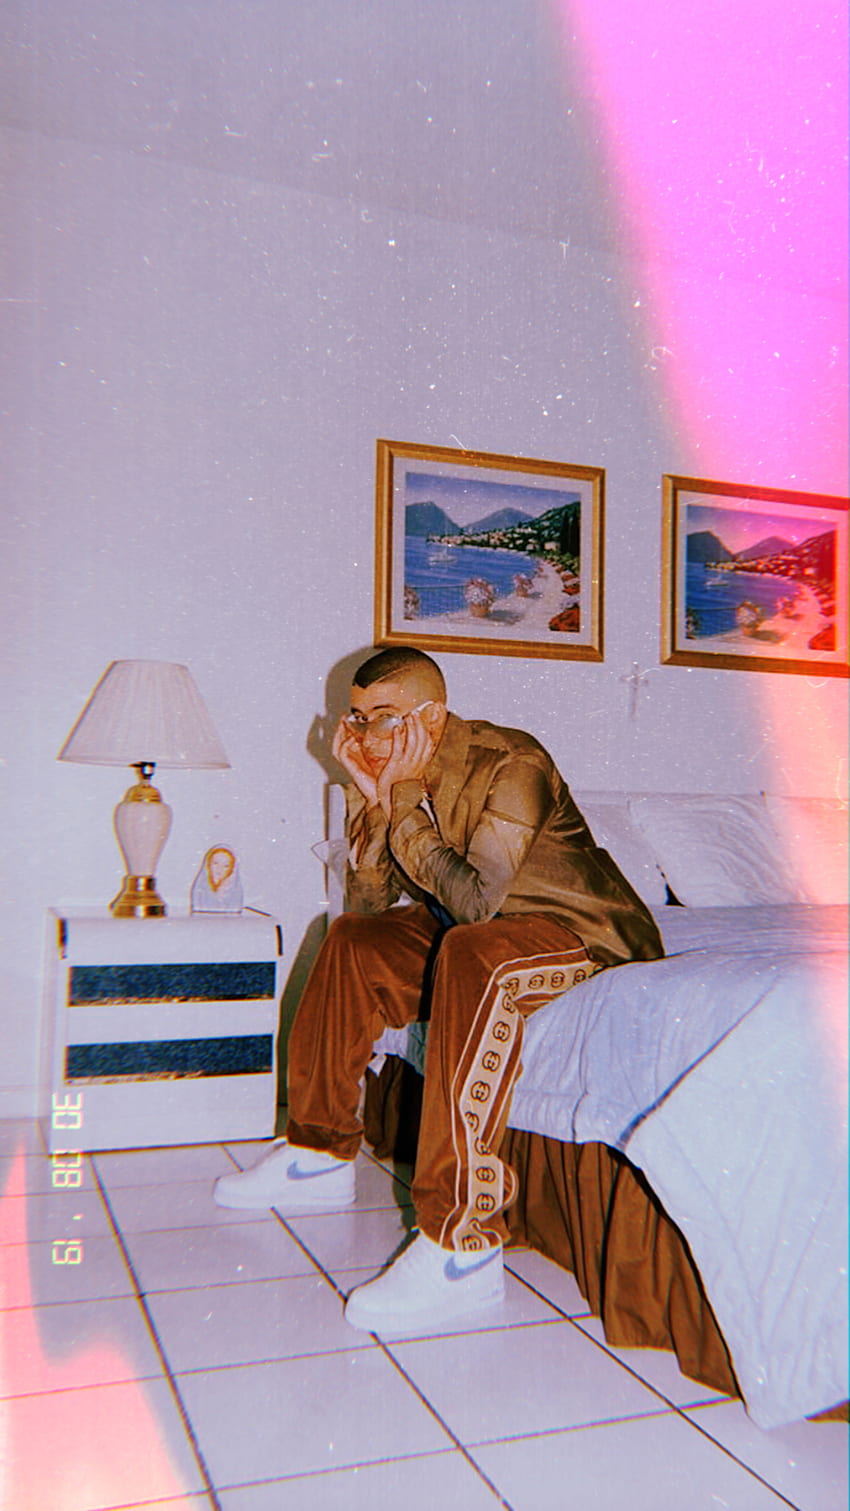 A man sitting on the bed in his room - Bad Bunny